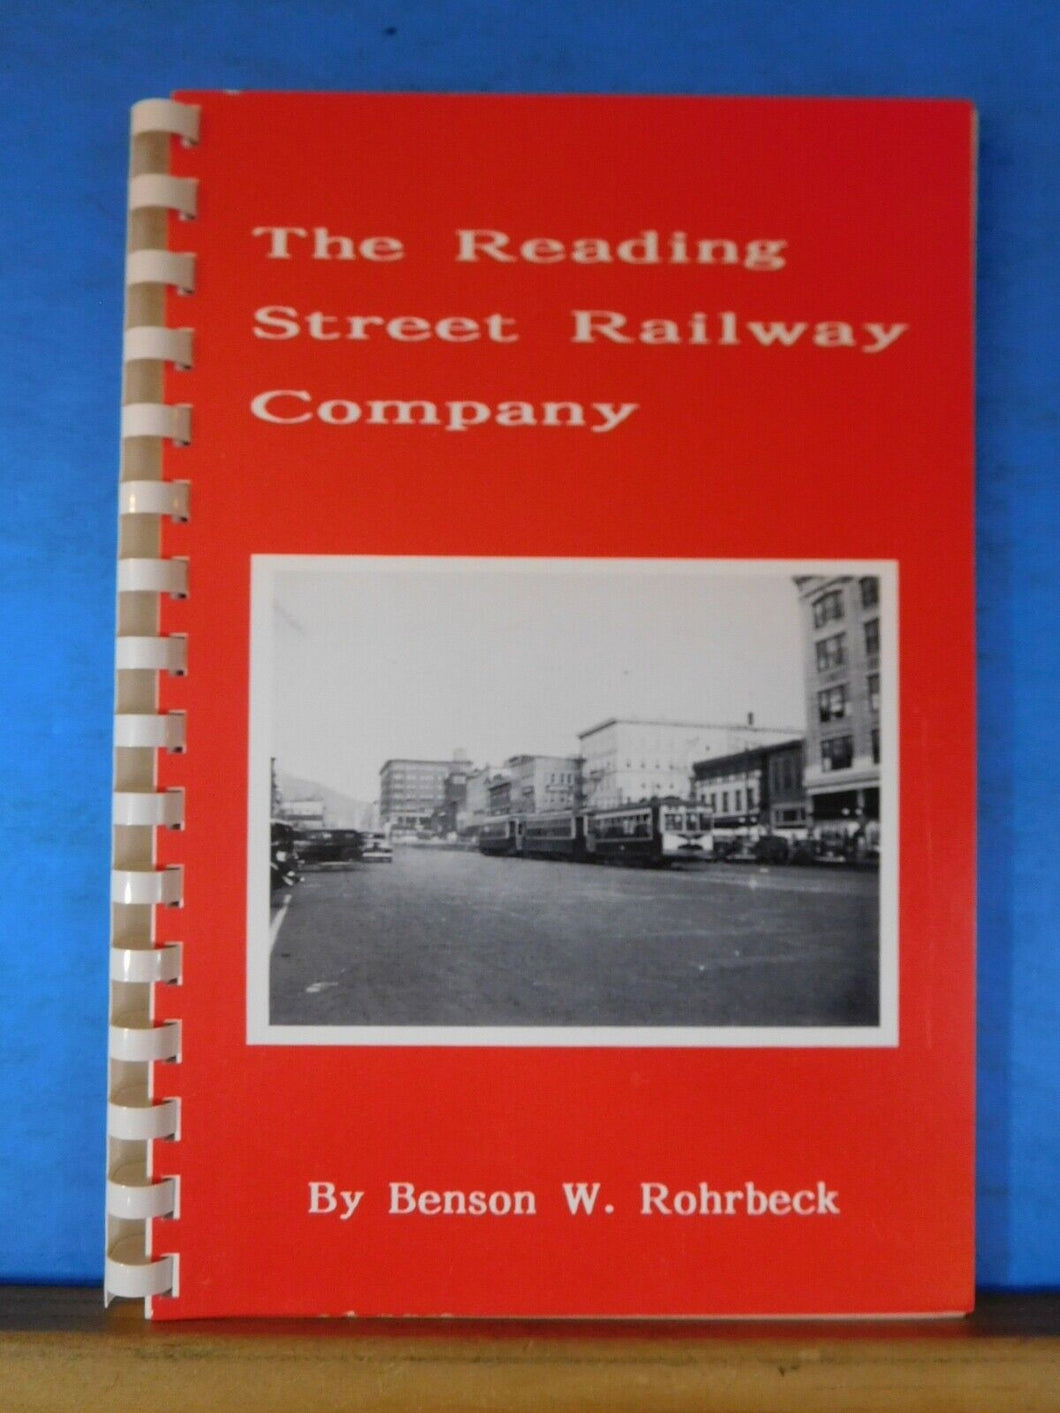 Reading Street Railway Company, The by Benson Rohrbeck Spiral Bound